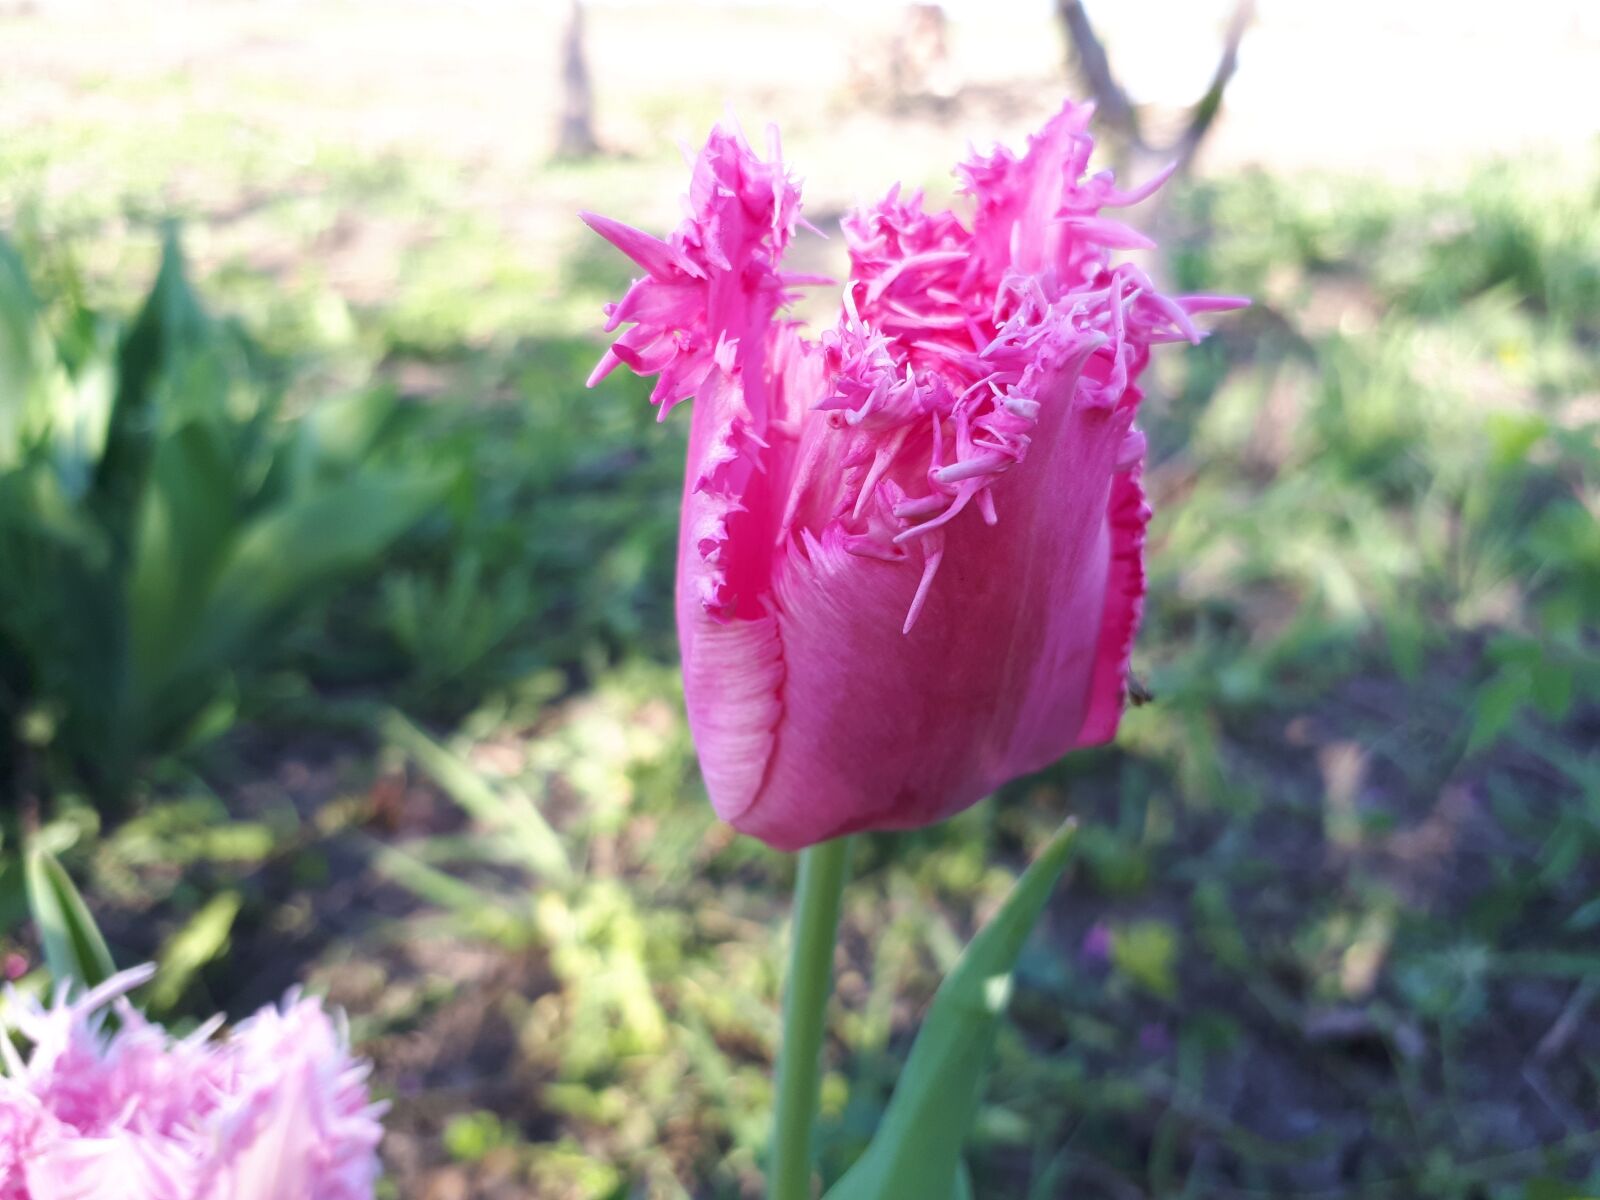 Samsung Galaxy A5(2017) sample photo. Flower, tulip, nature photography